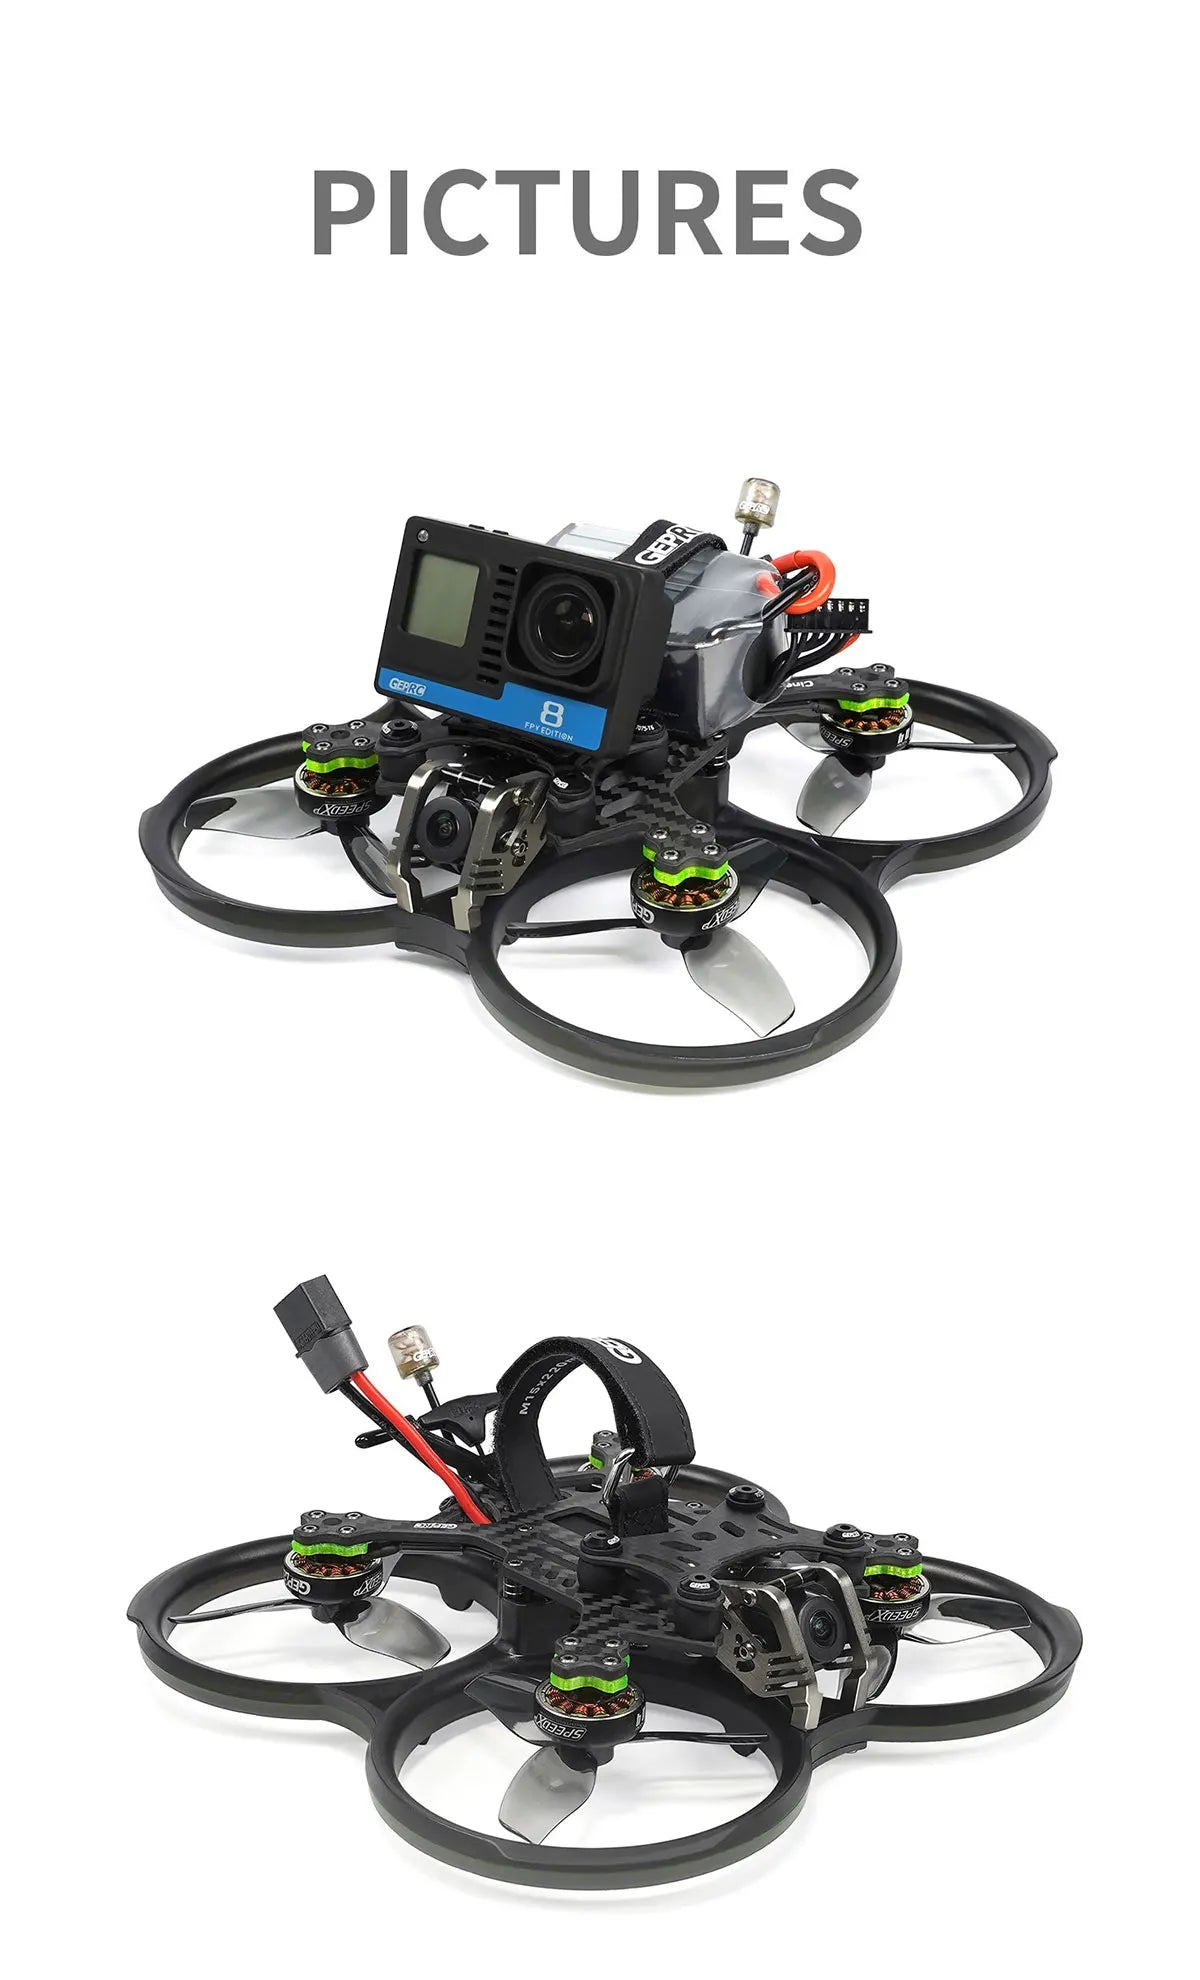 GEPRC Cinebot30 FPV Drone, PICTURES 8 Xu33 GEHRO Edit